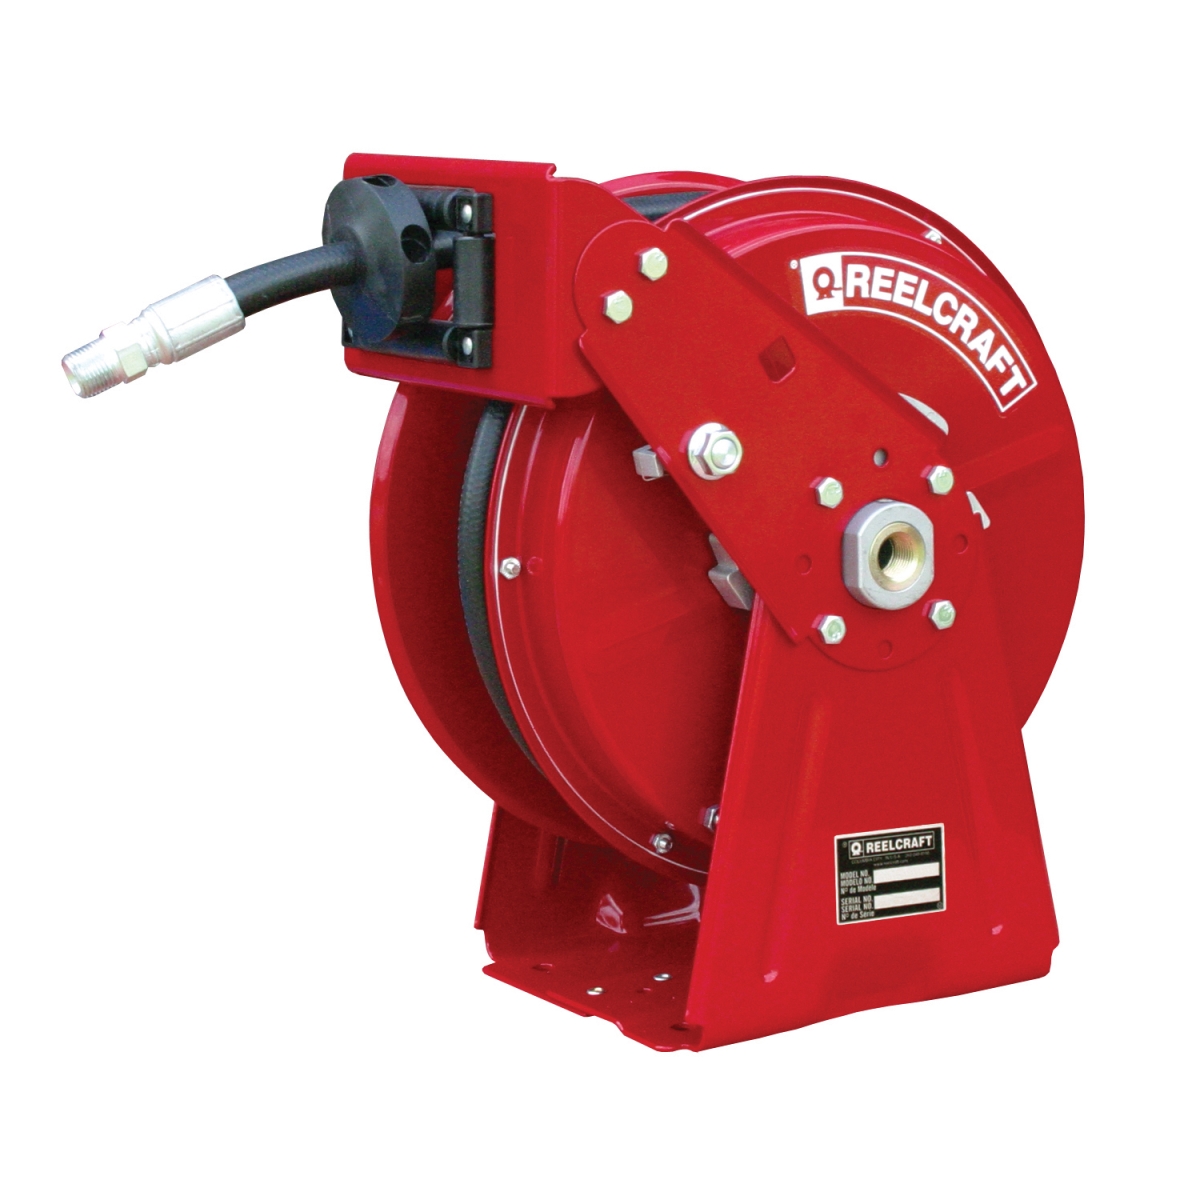 Dp5835 Omp 0.5 In. X 35 Ft. 3000 Psi Oil With Hose Reel, Red